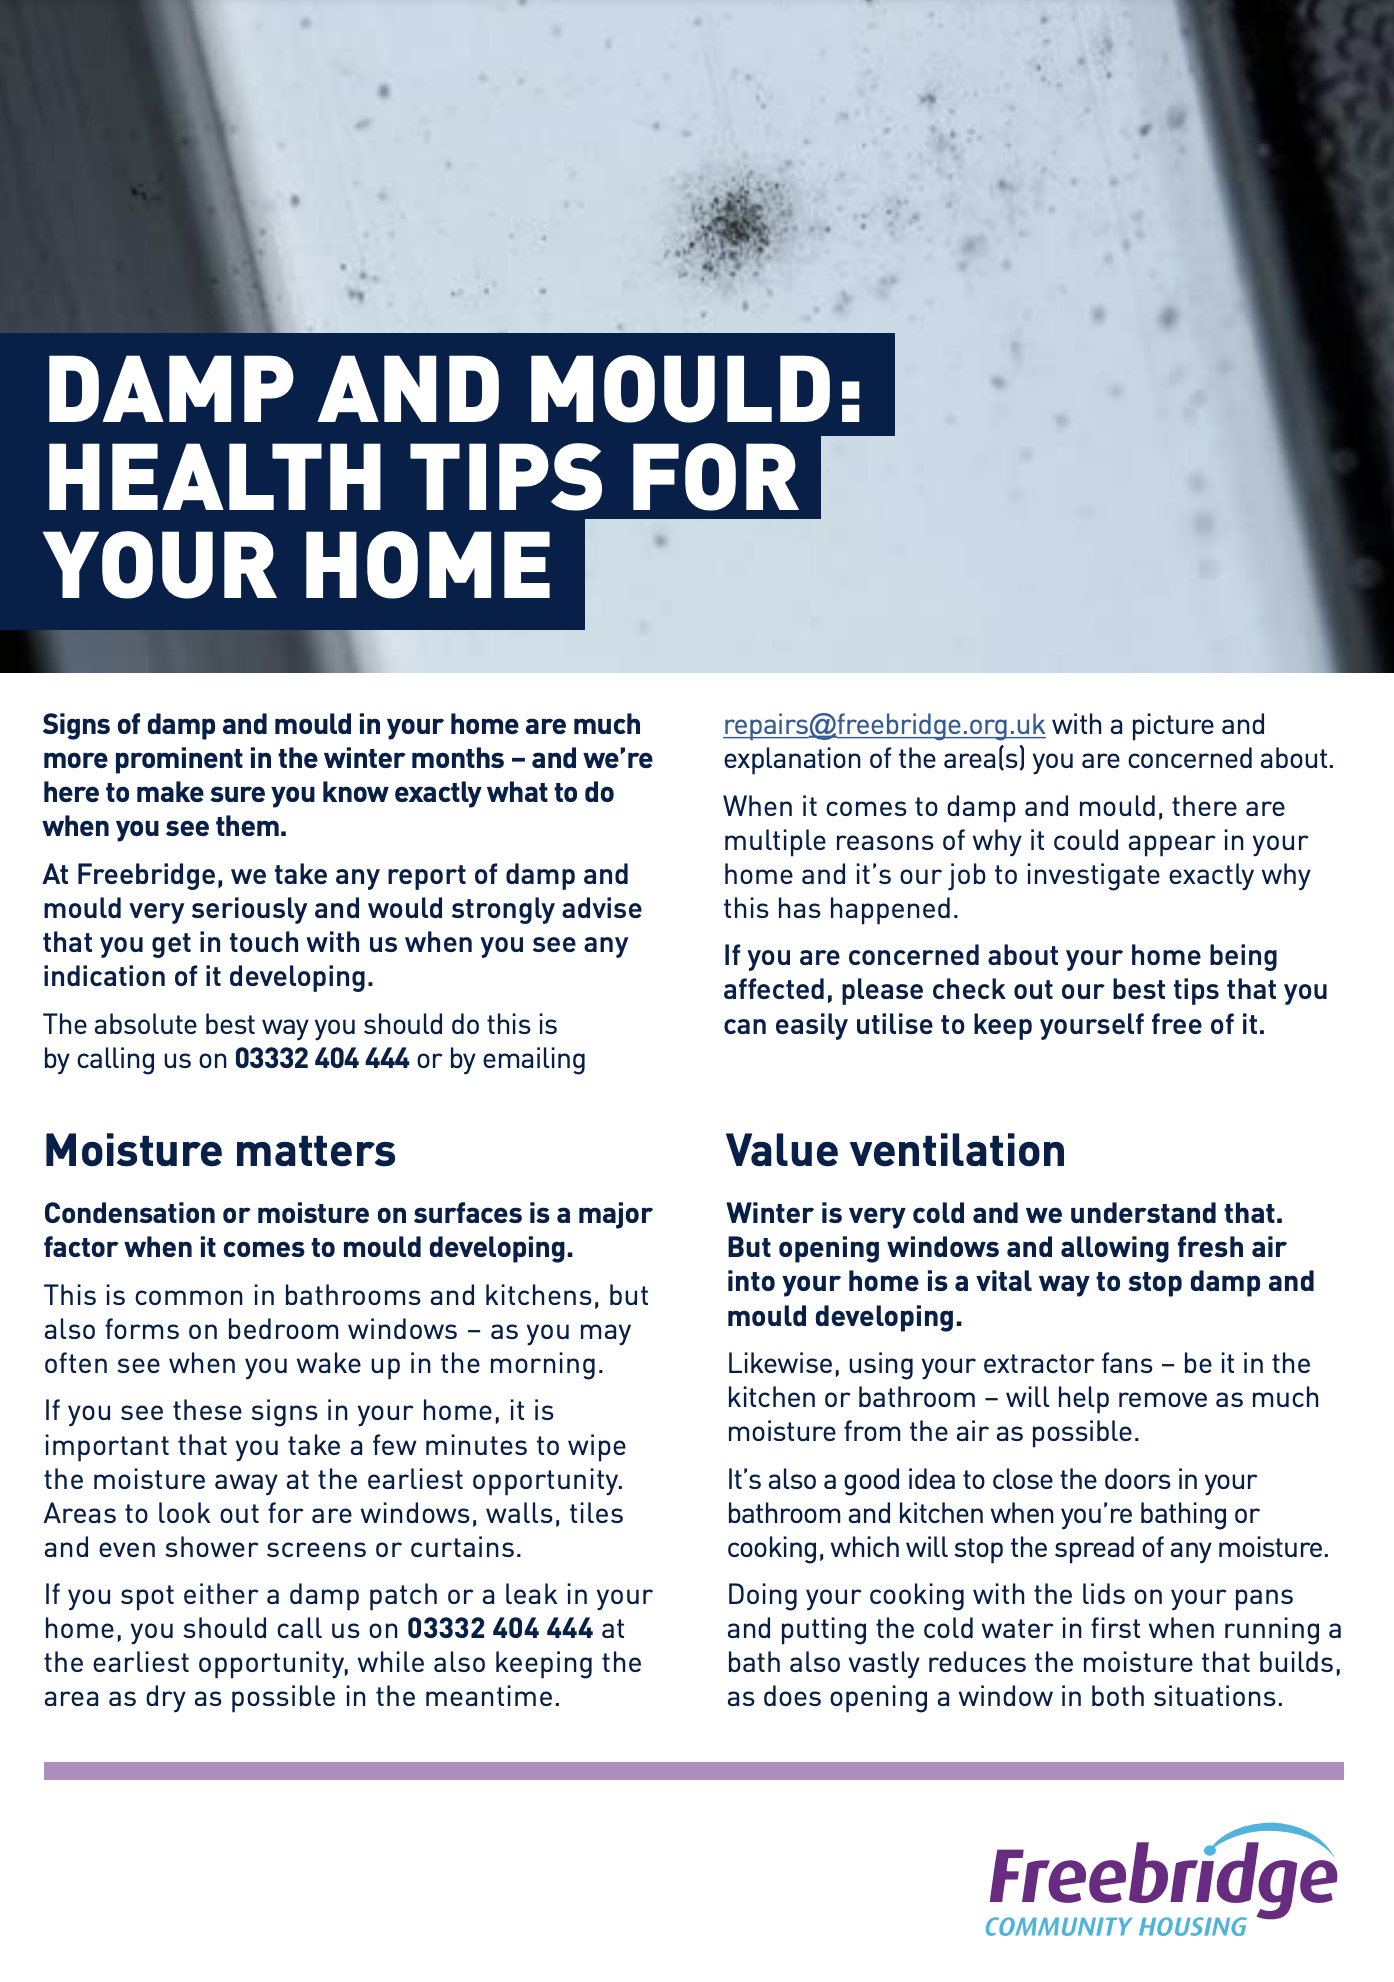 Cover of damp and mould leaflet